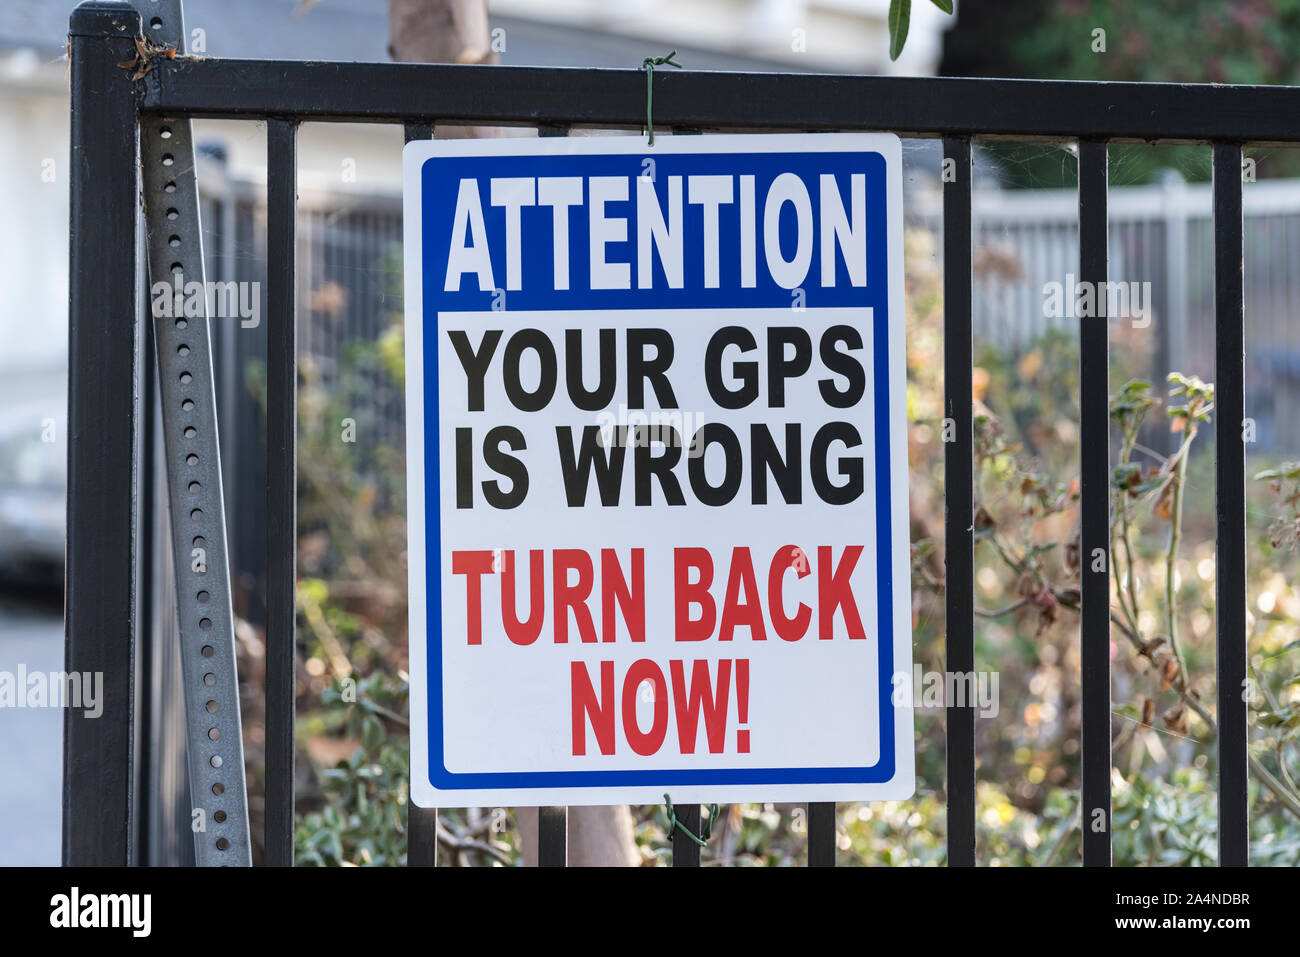 Attention your gps is wrong turn back now warning sign. Stock Photo